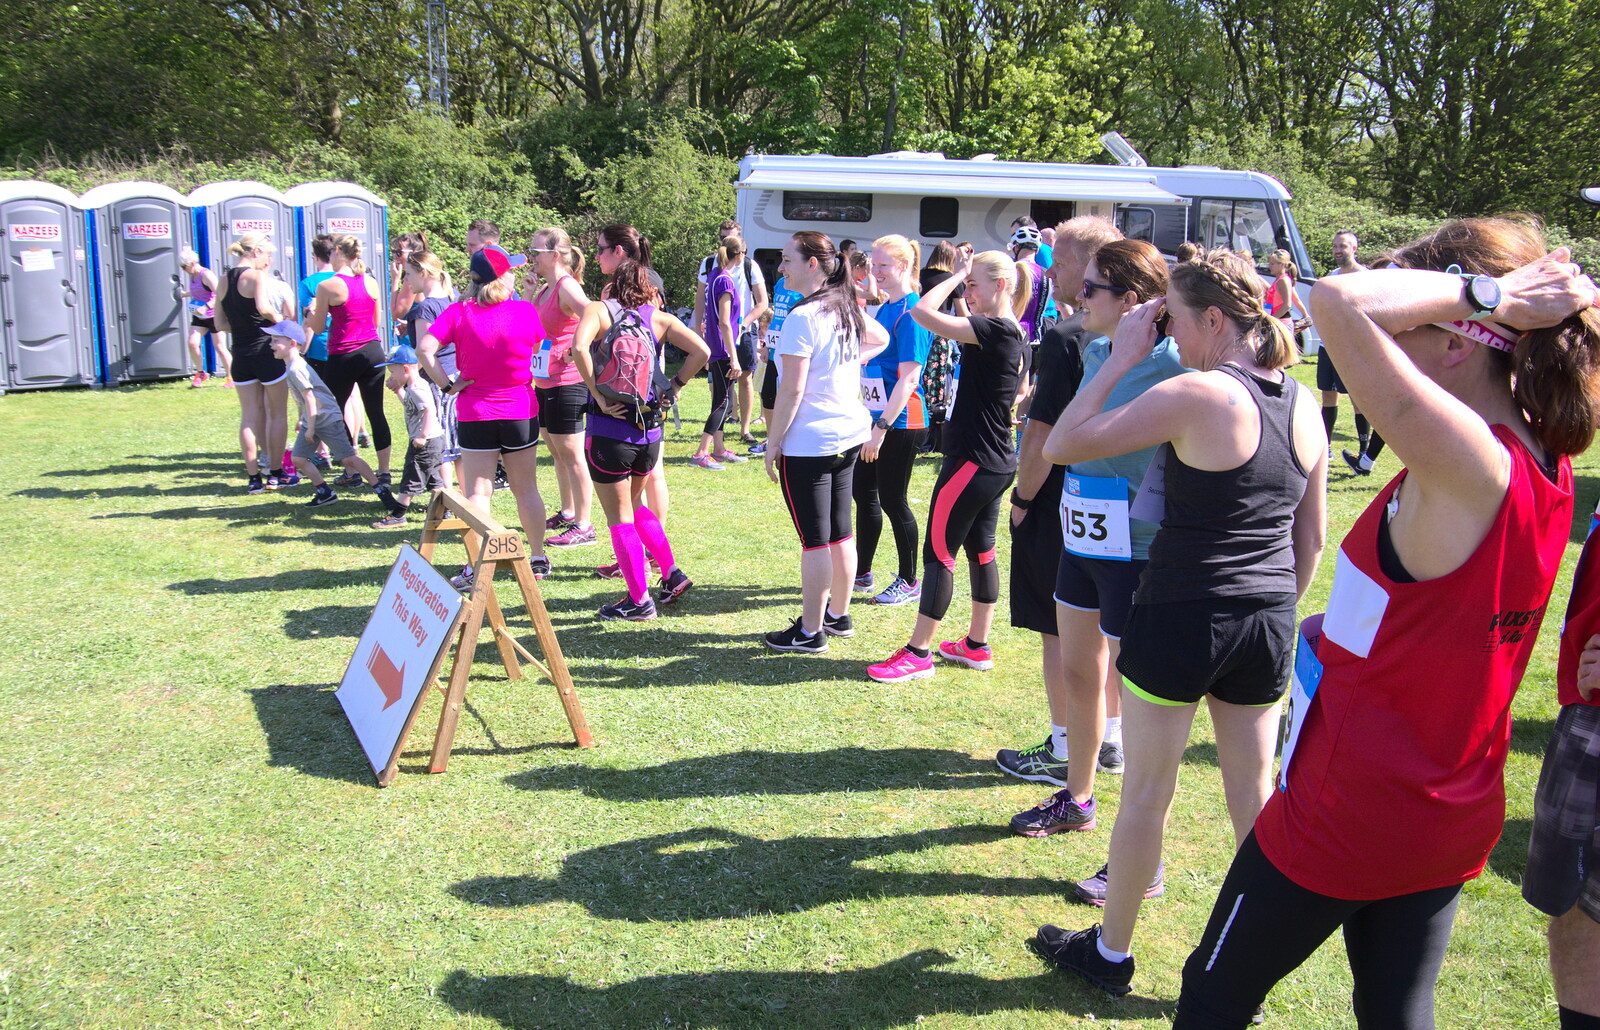 There's a big queue for the bogs from Isobel's 10km Run, Alton Water, Stutton, Suffolk - 6th May 2018